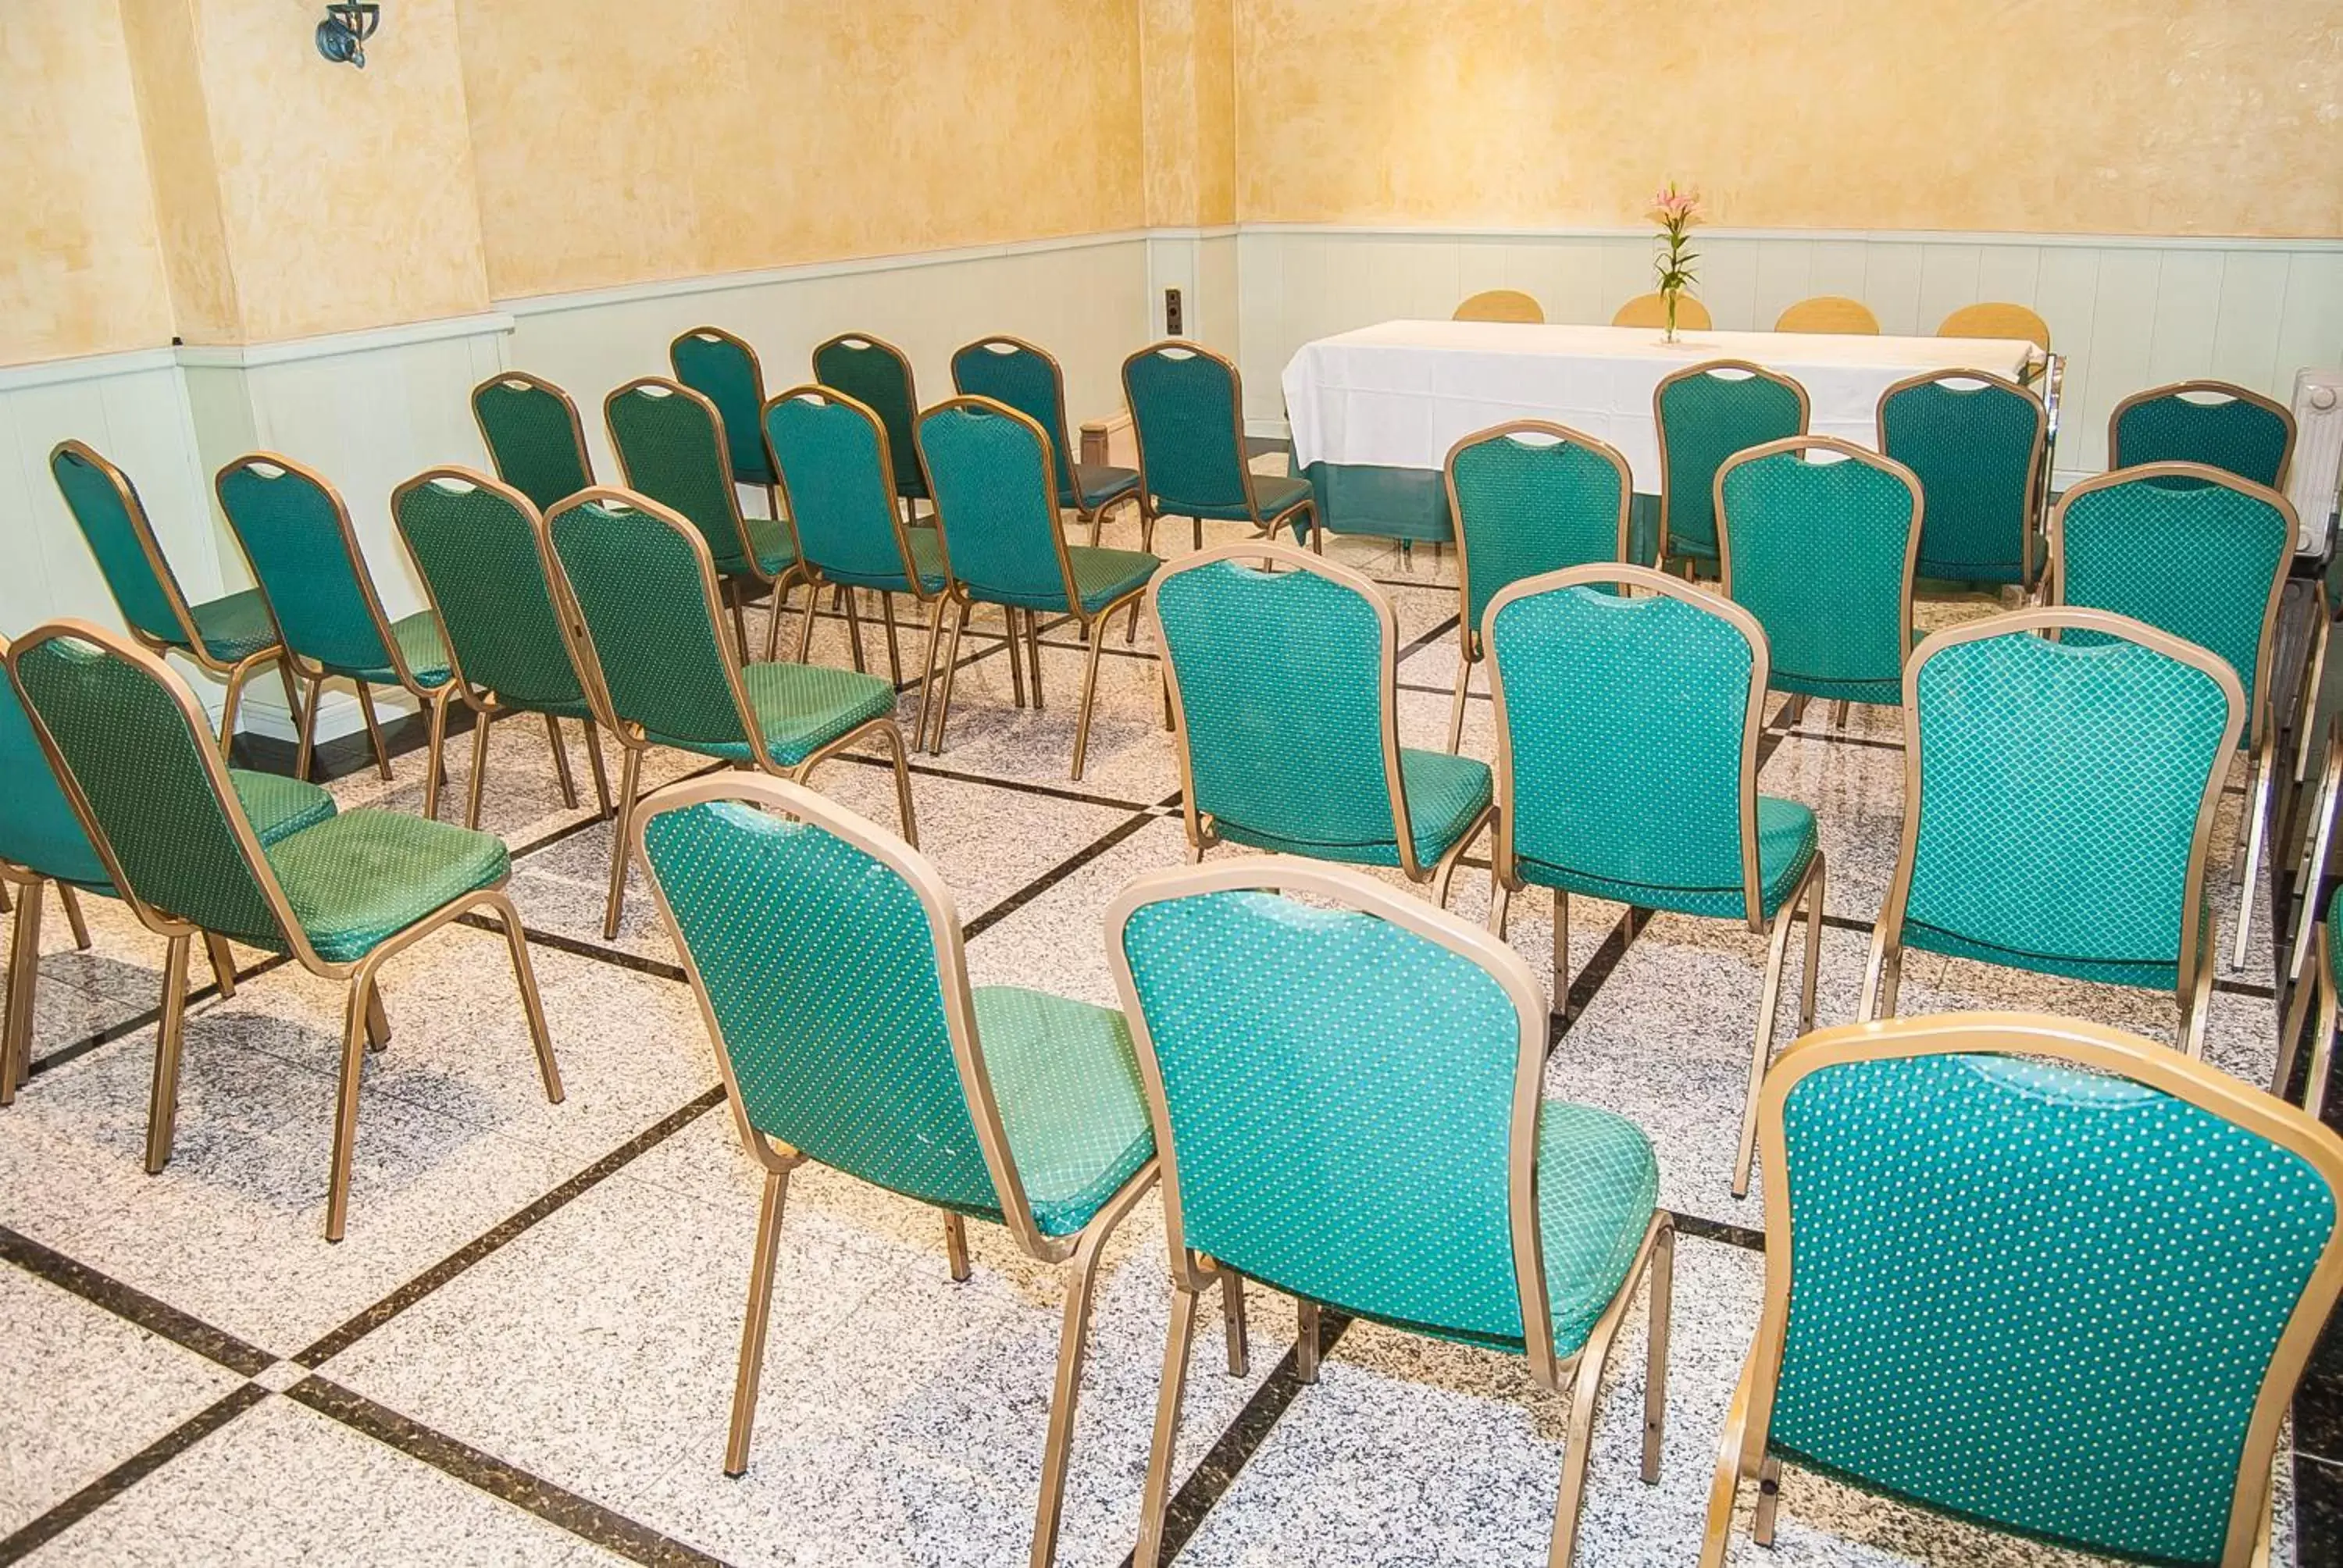 Meeting/conference room in Ana María